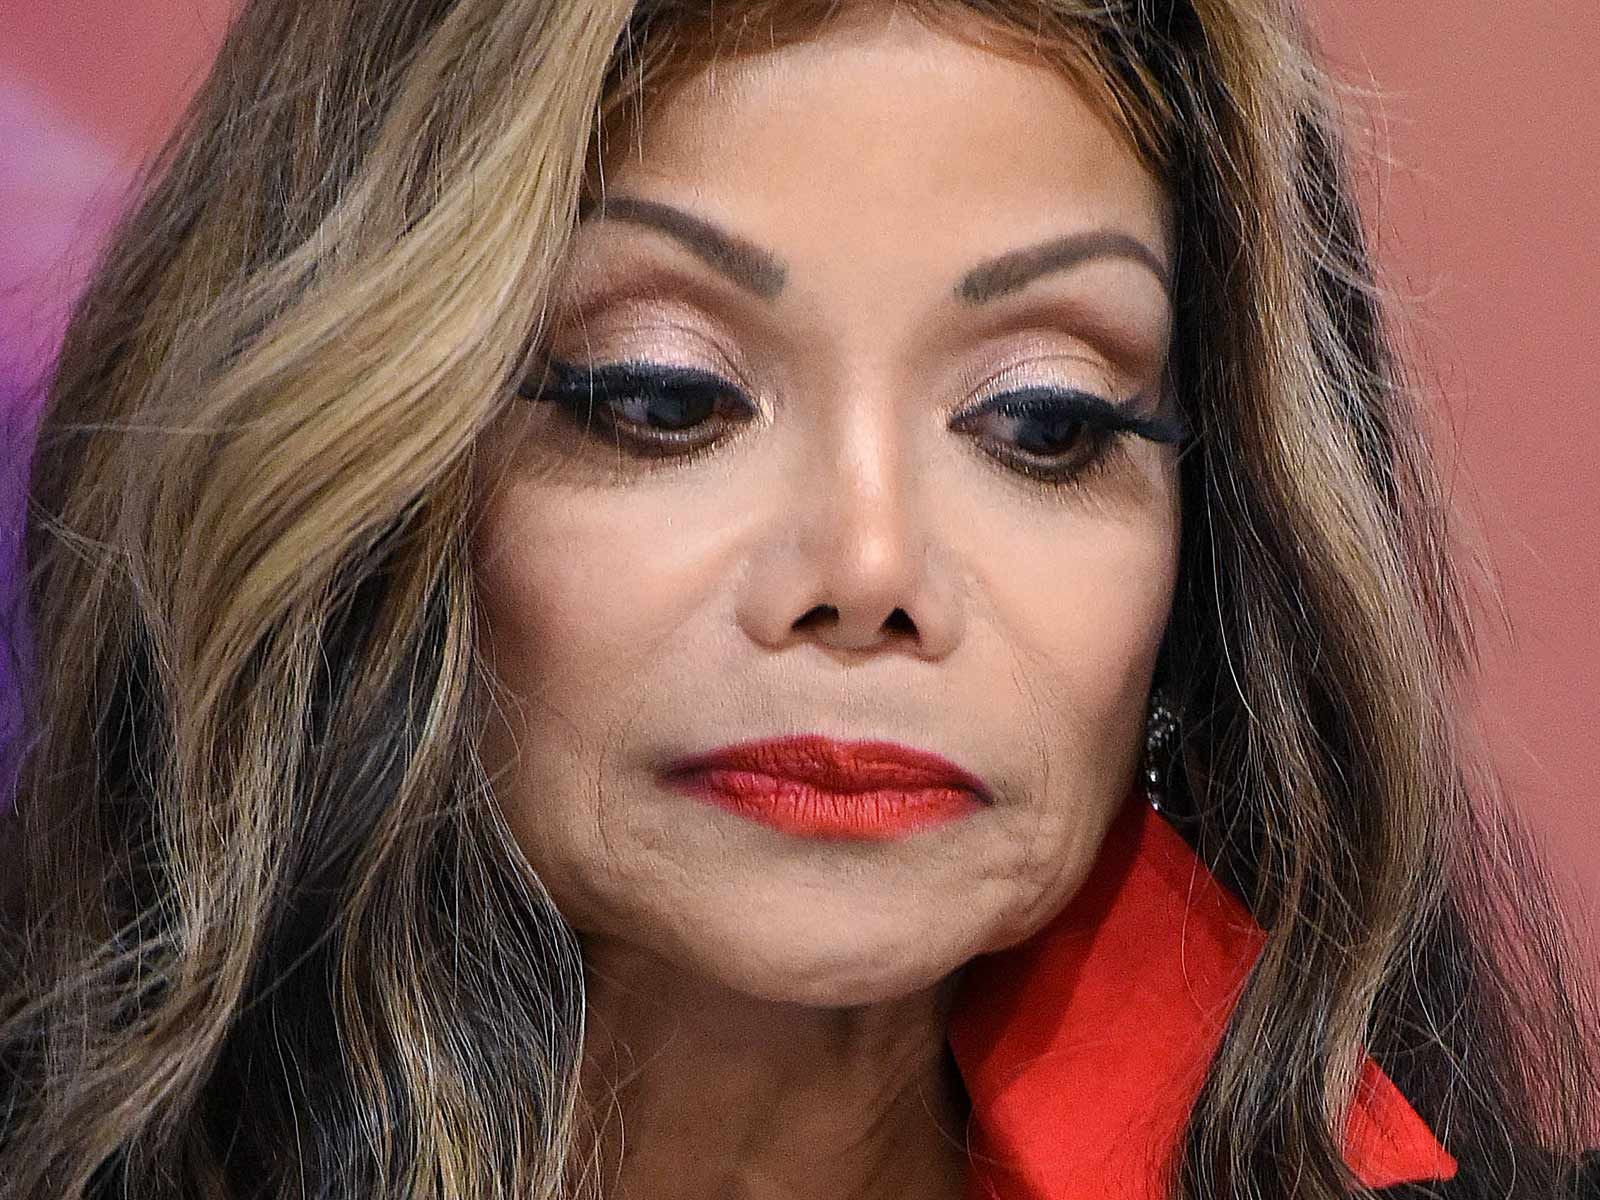 La Toya Jackson Net Worth in 2020, Career, and All You Need to Know.